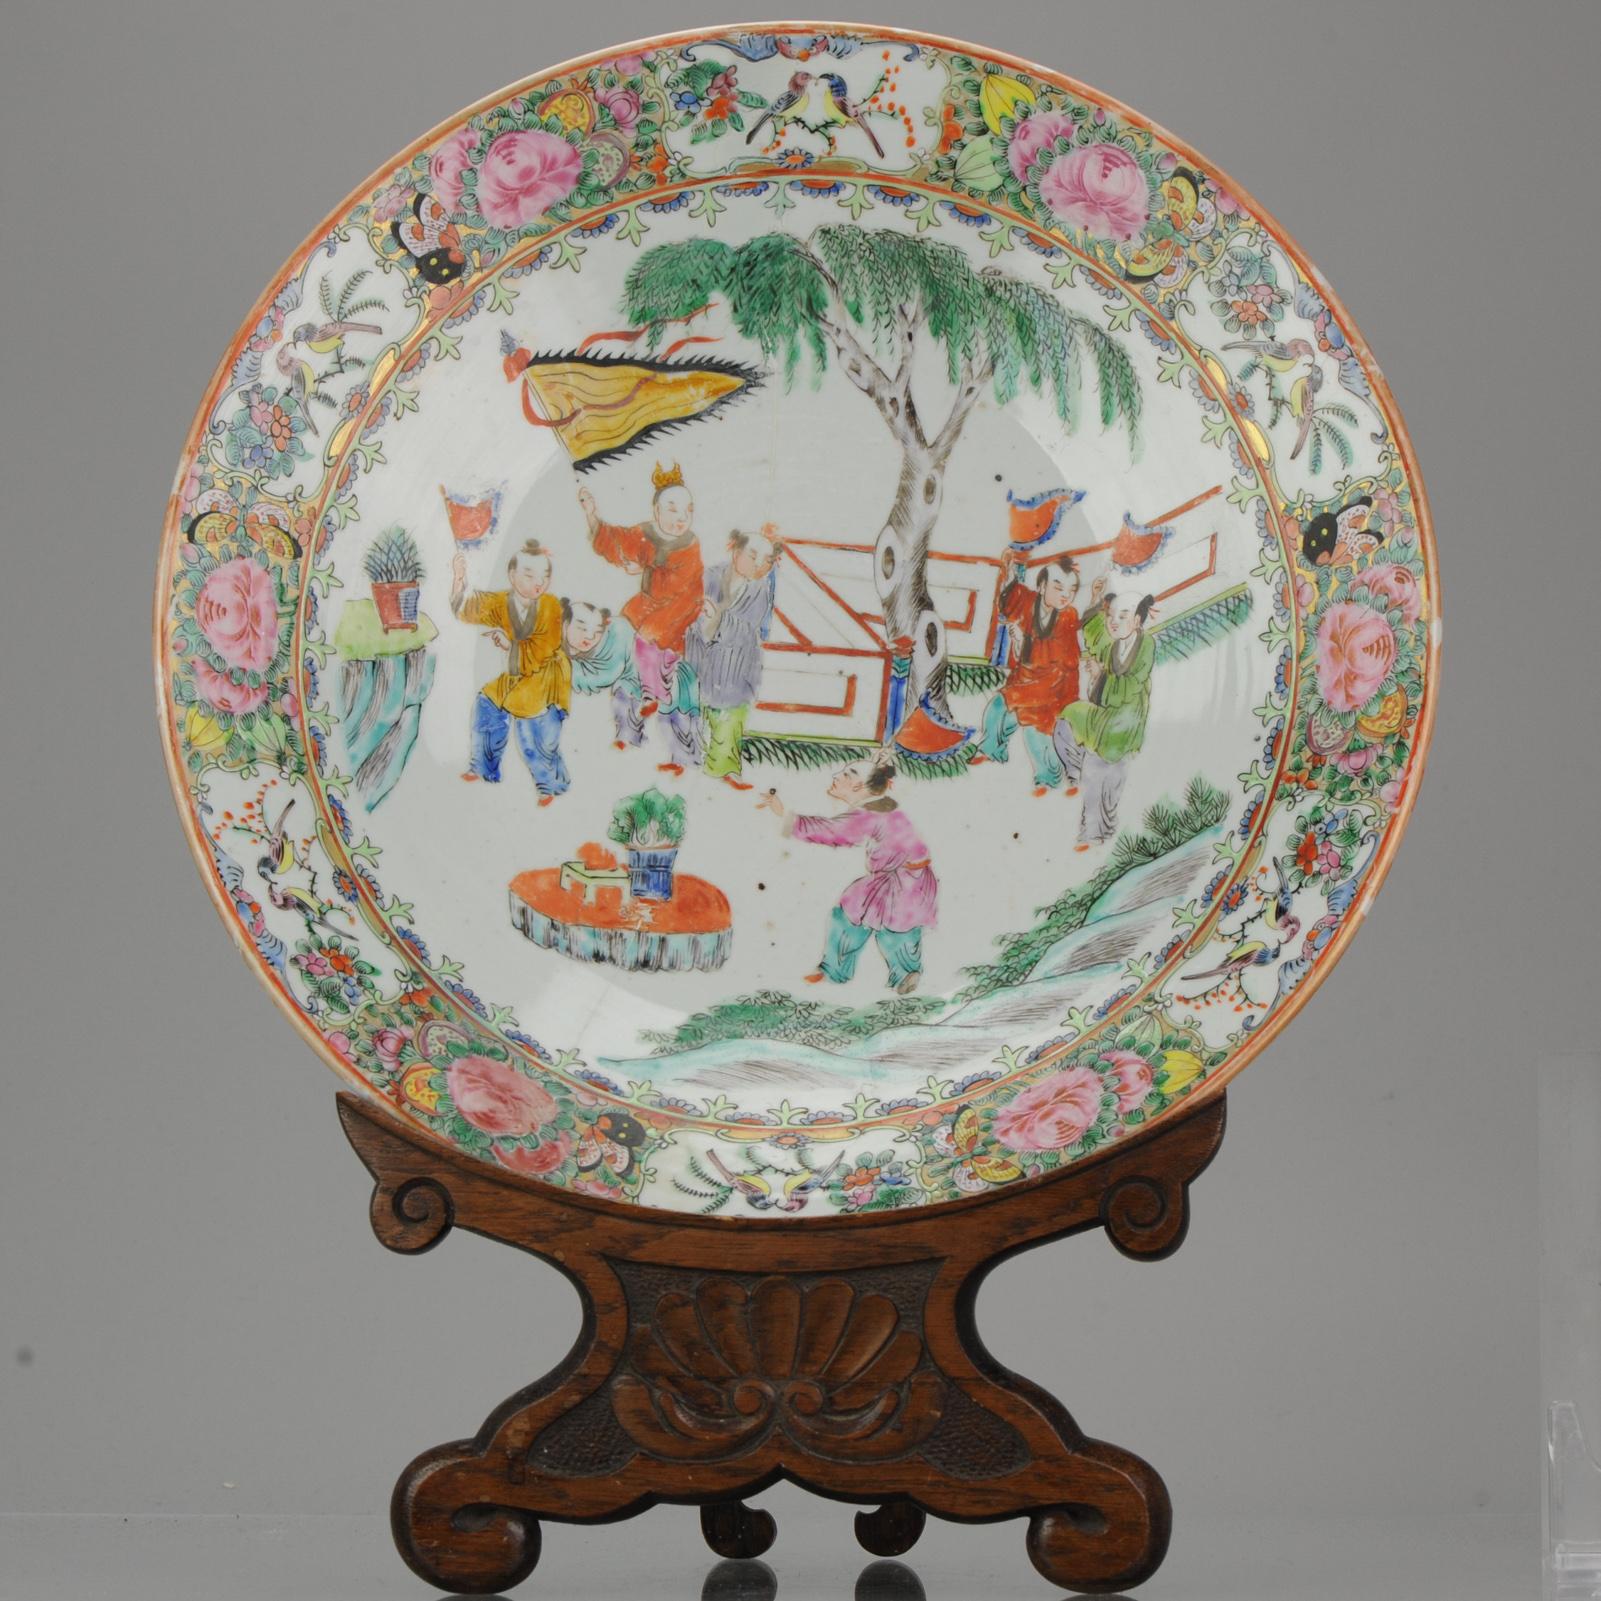 Description

A very nice and stunningly painted polychrome porcelain plate decorated with flowers, figures and flags. China, 19th century.

Truly a museum piece.


Condition
Overall Condition was broken in half and the base was repainted to